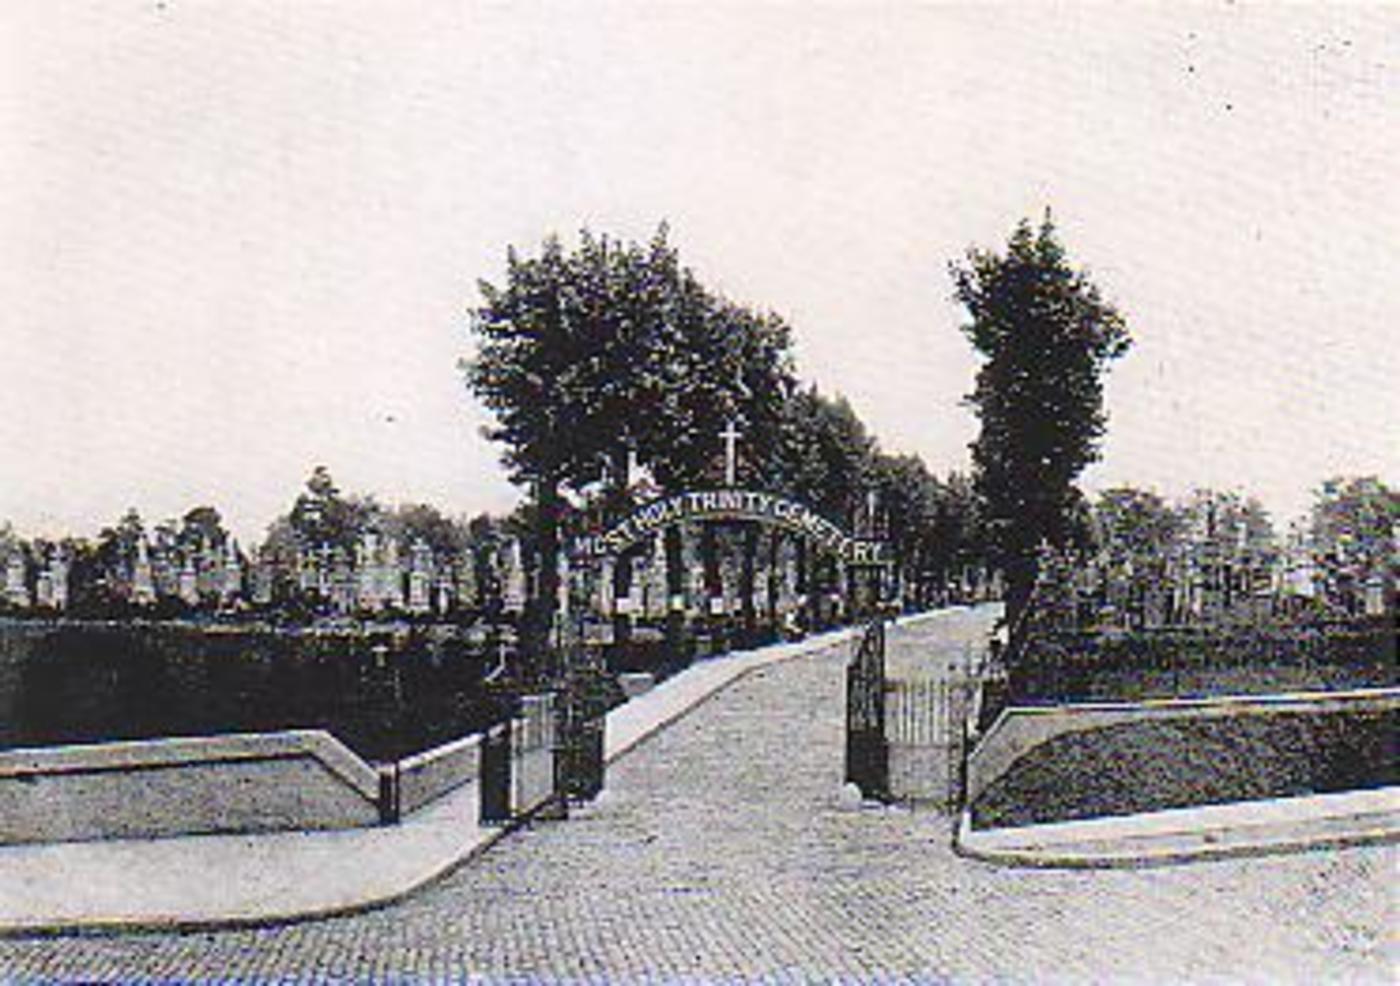 The Entrance to Most Holy Trinity Cemetery in 1921